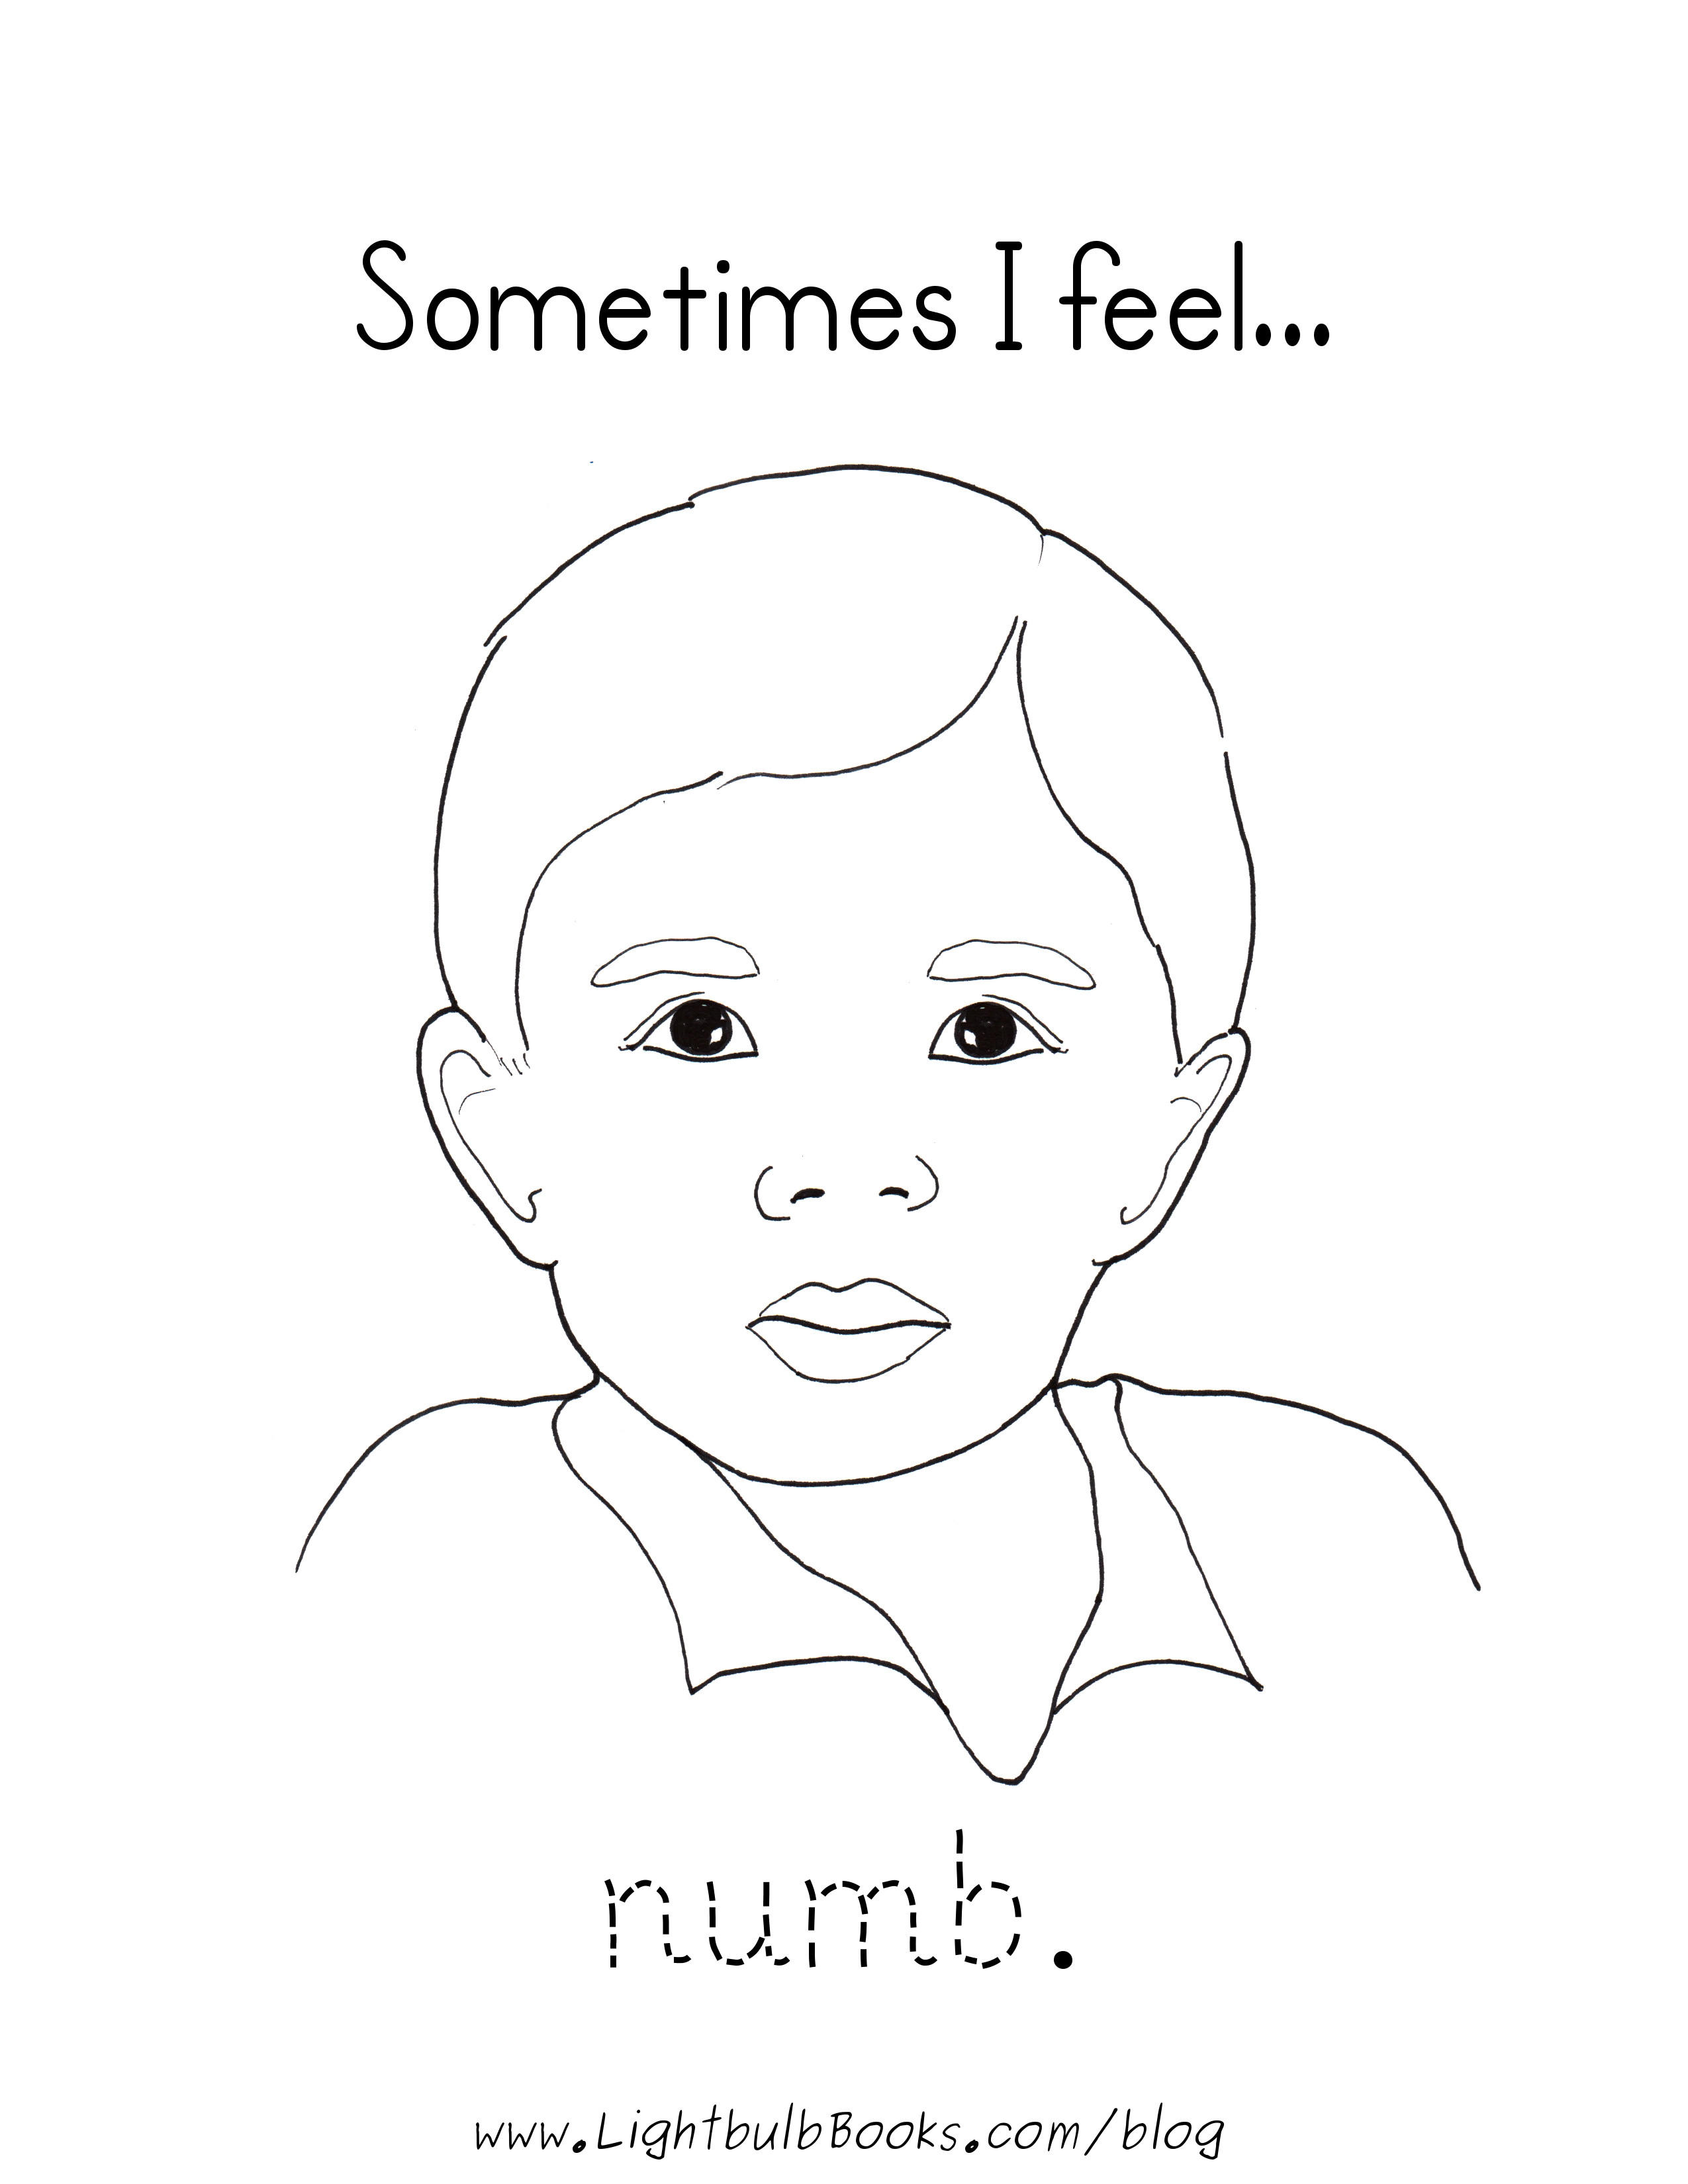 Numb - Feelings Coloring Pages